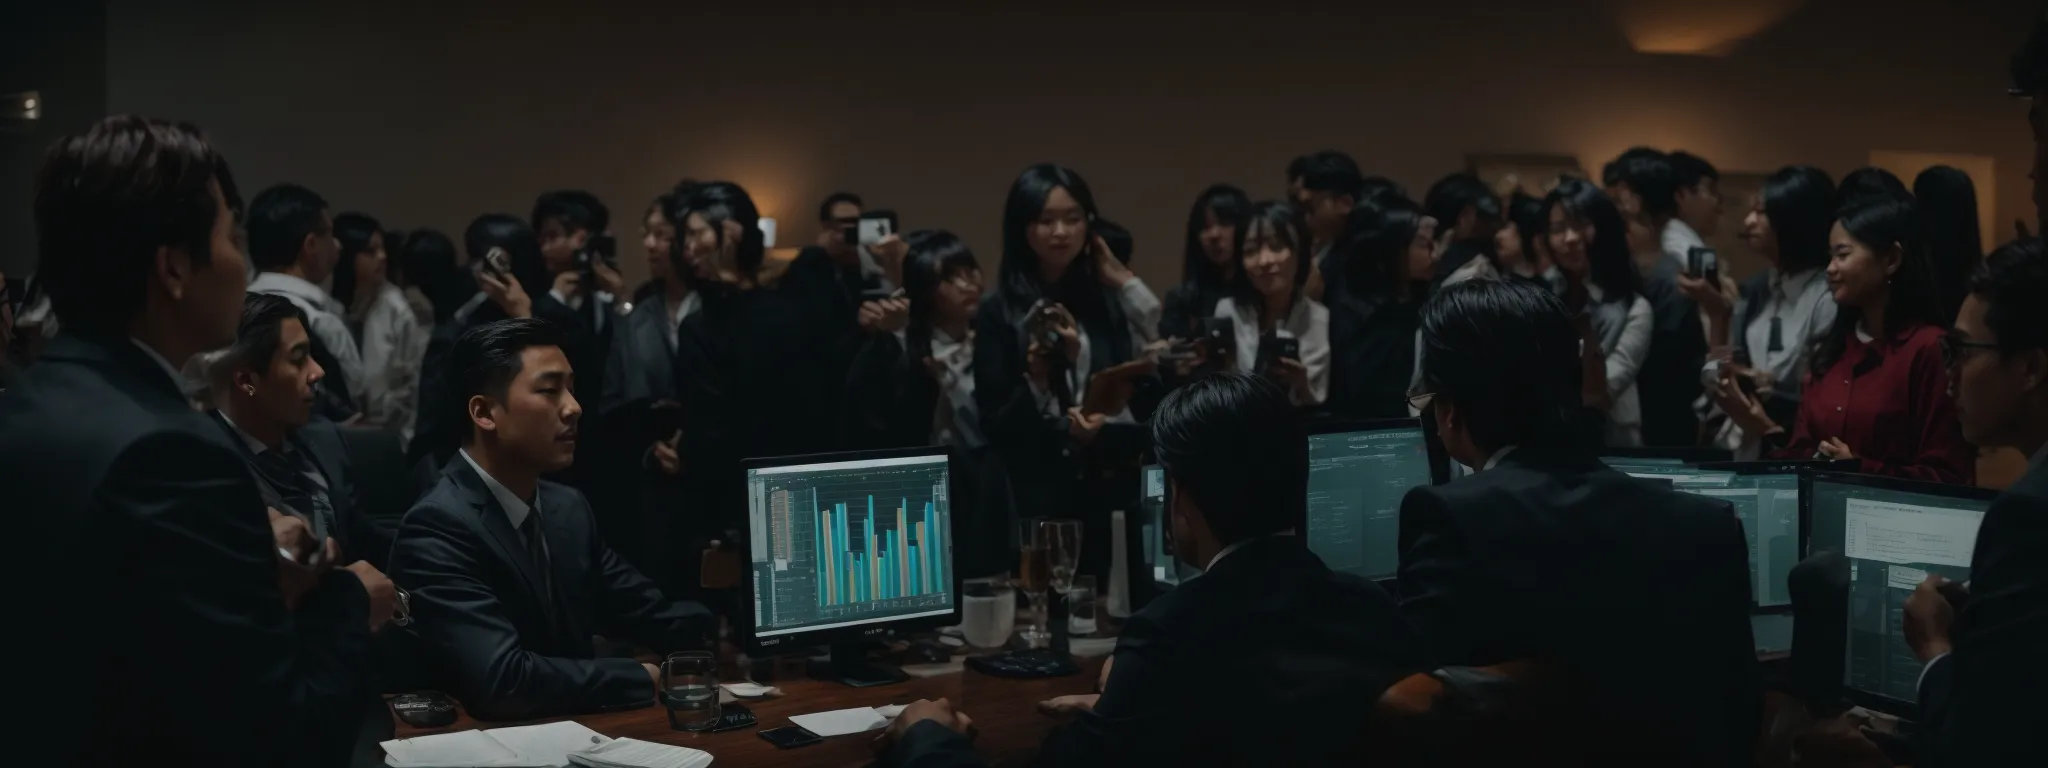 a group of professionals celebrating around a computer displaying a rising analytics graph.